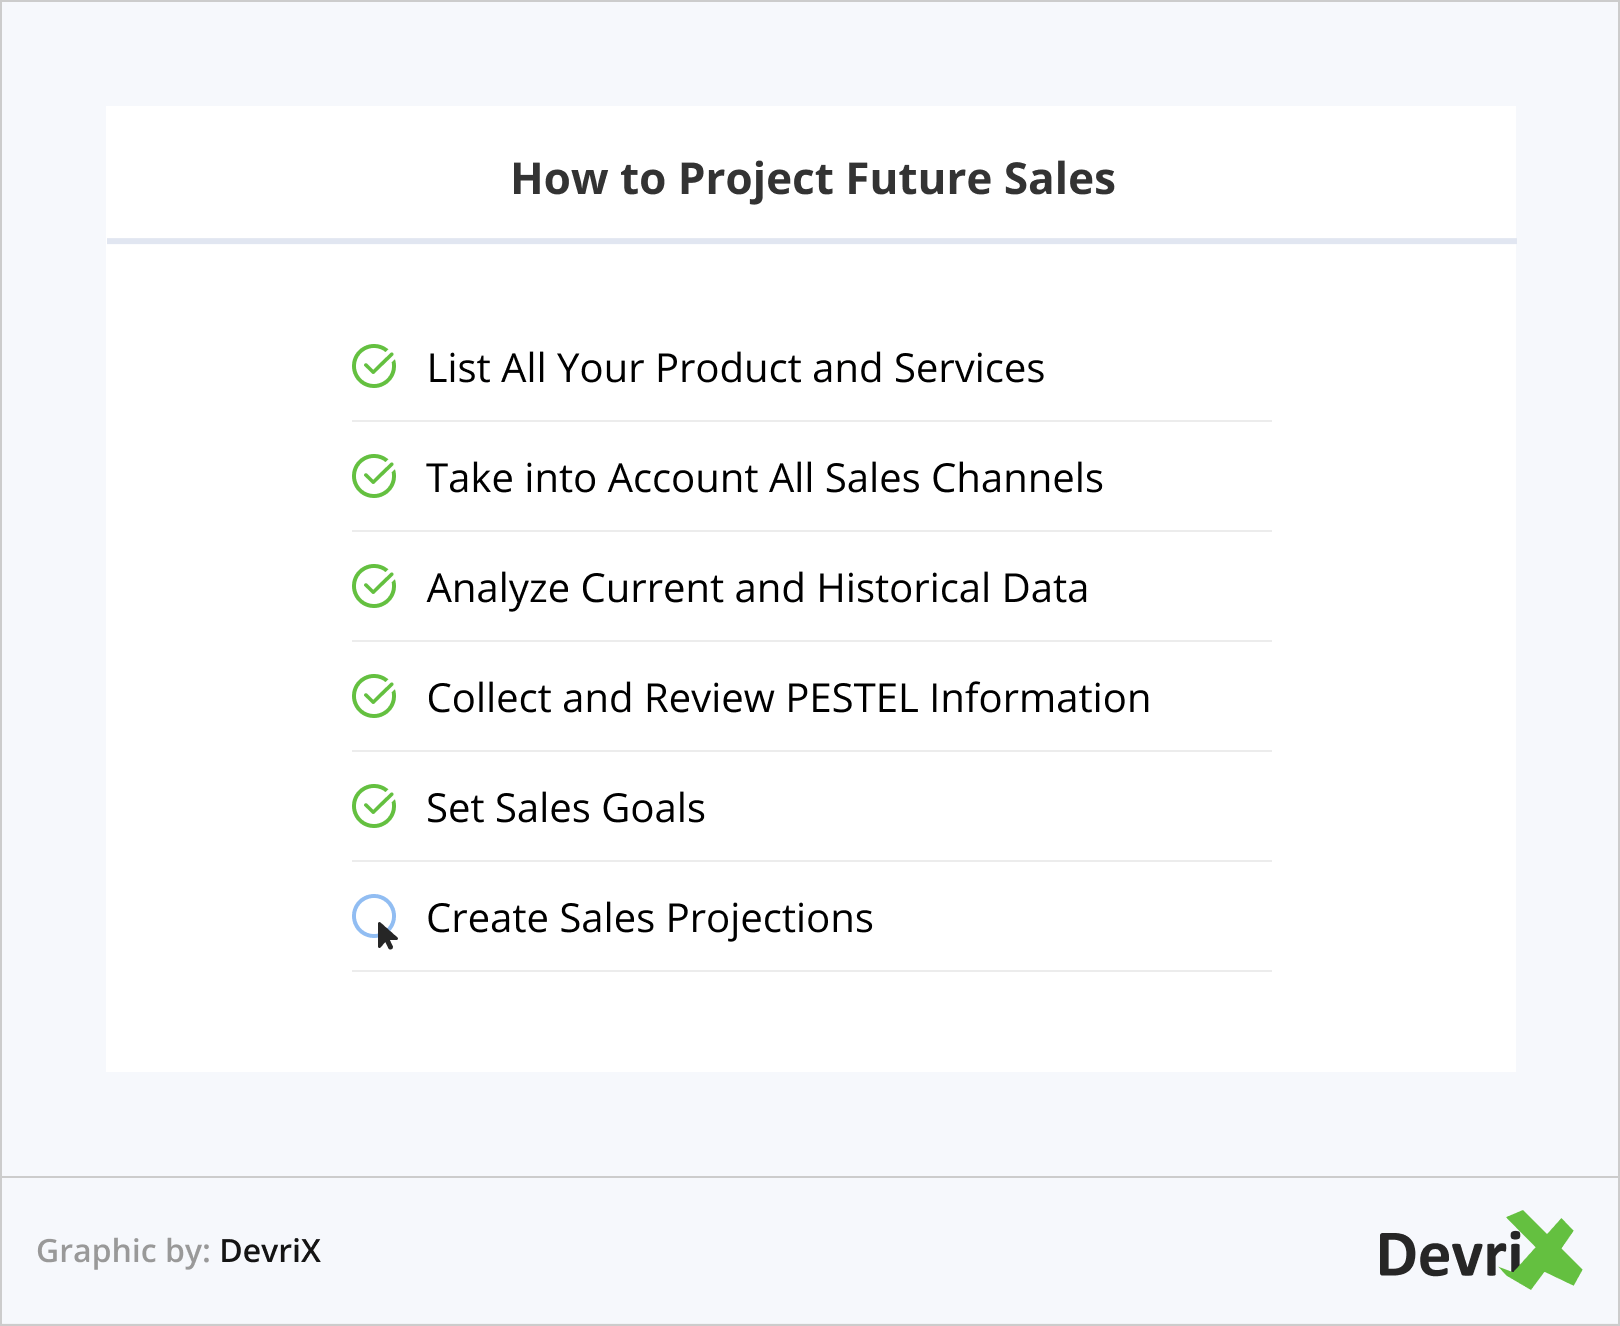 How to Project Future Sales